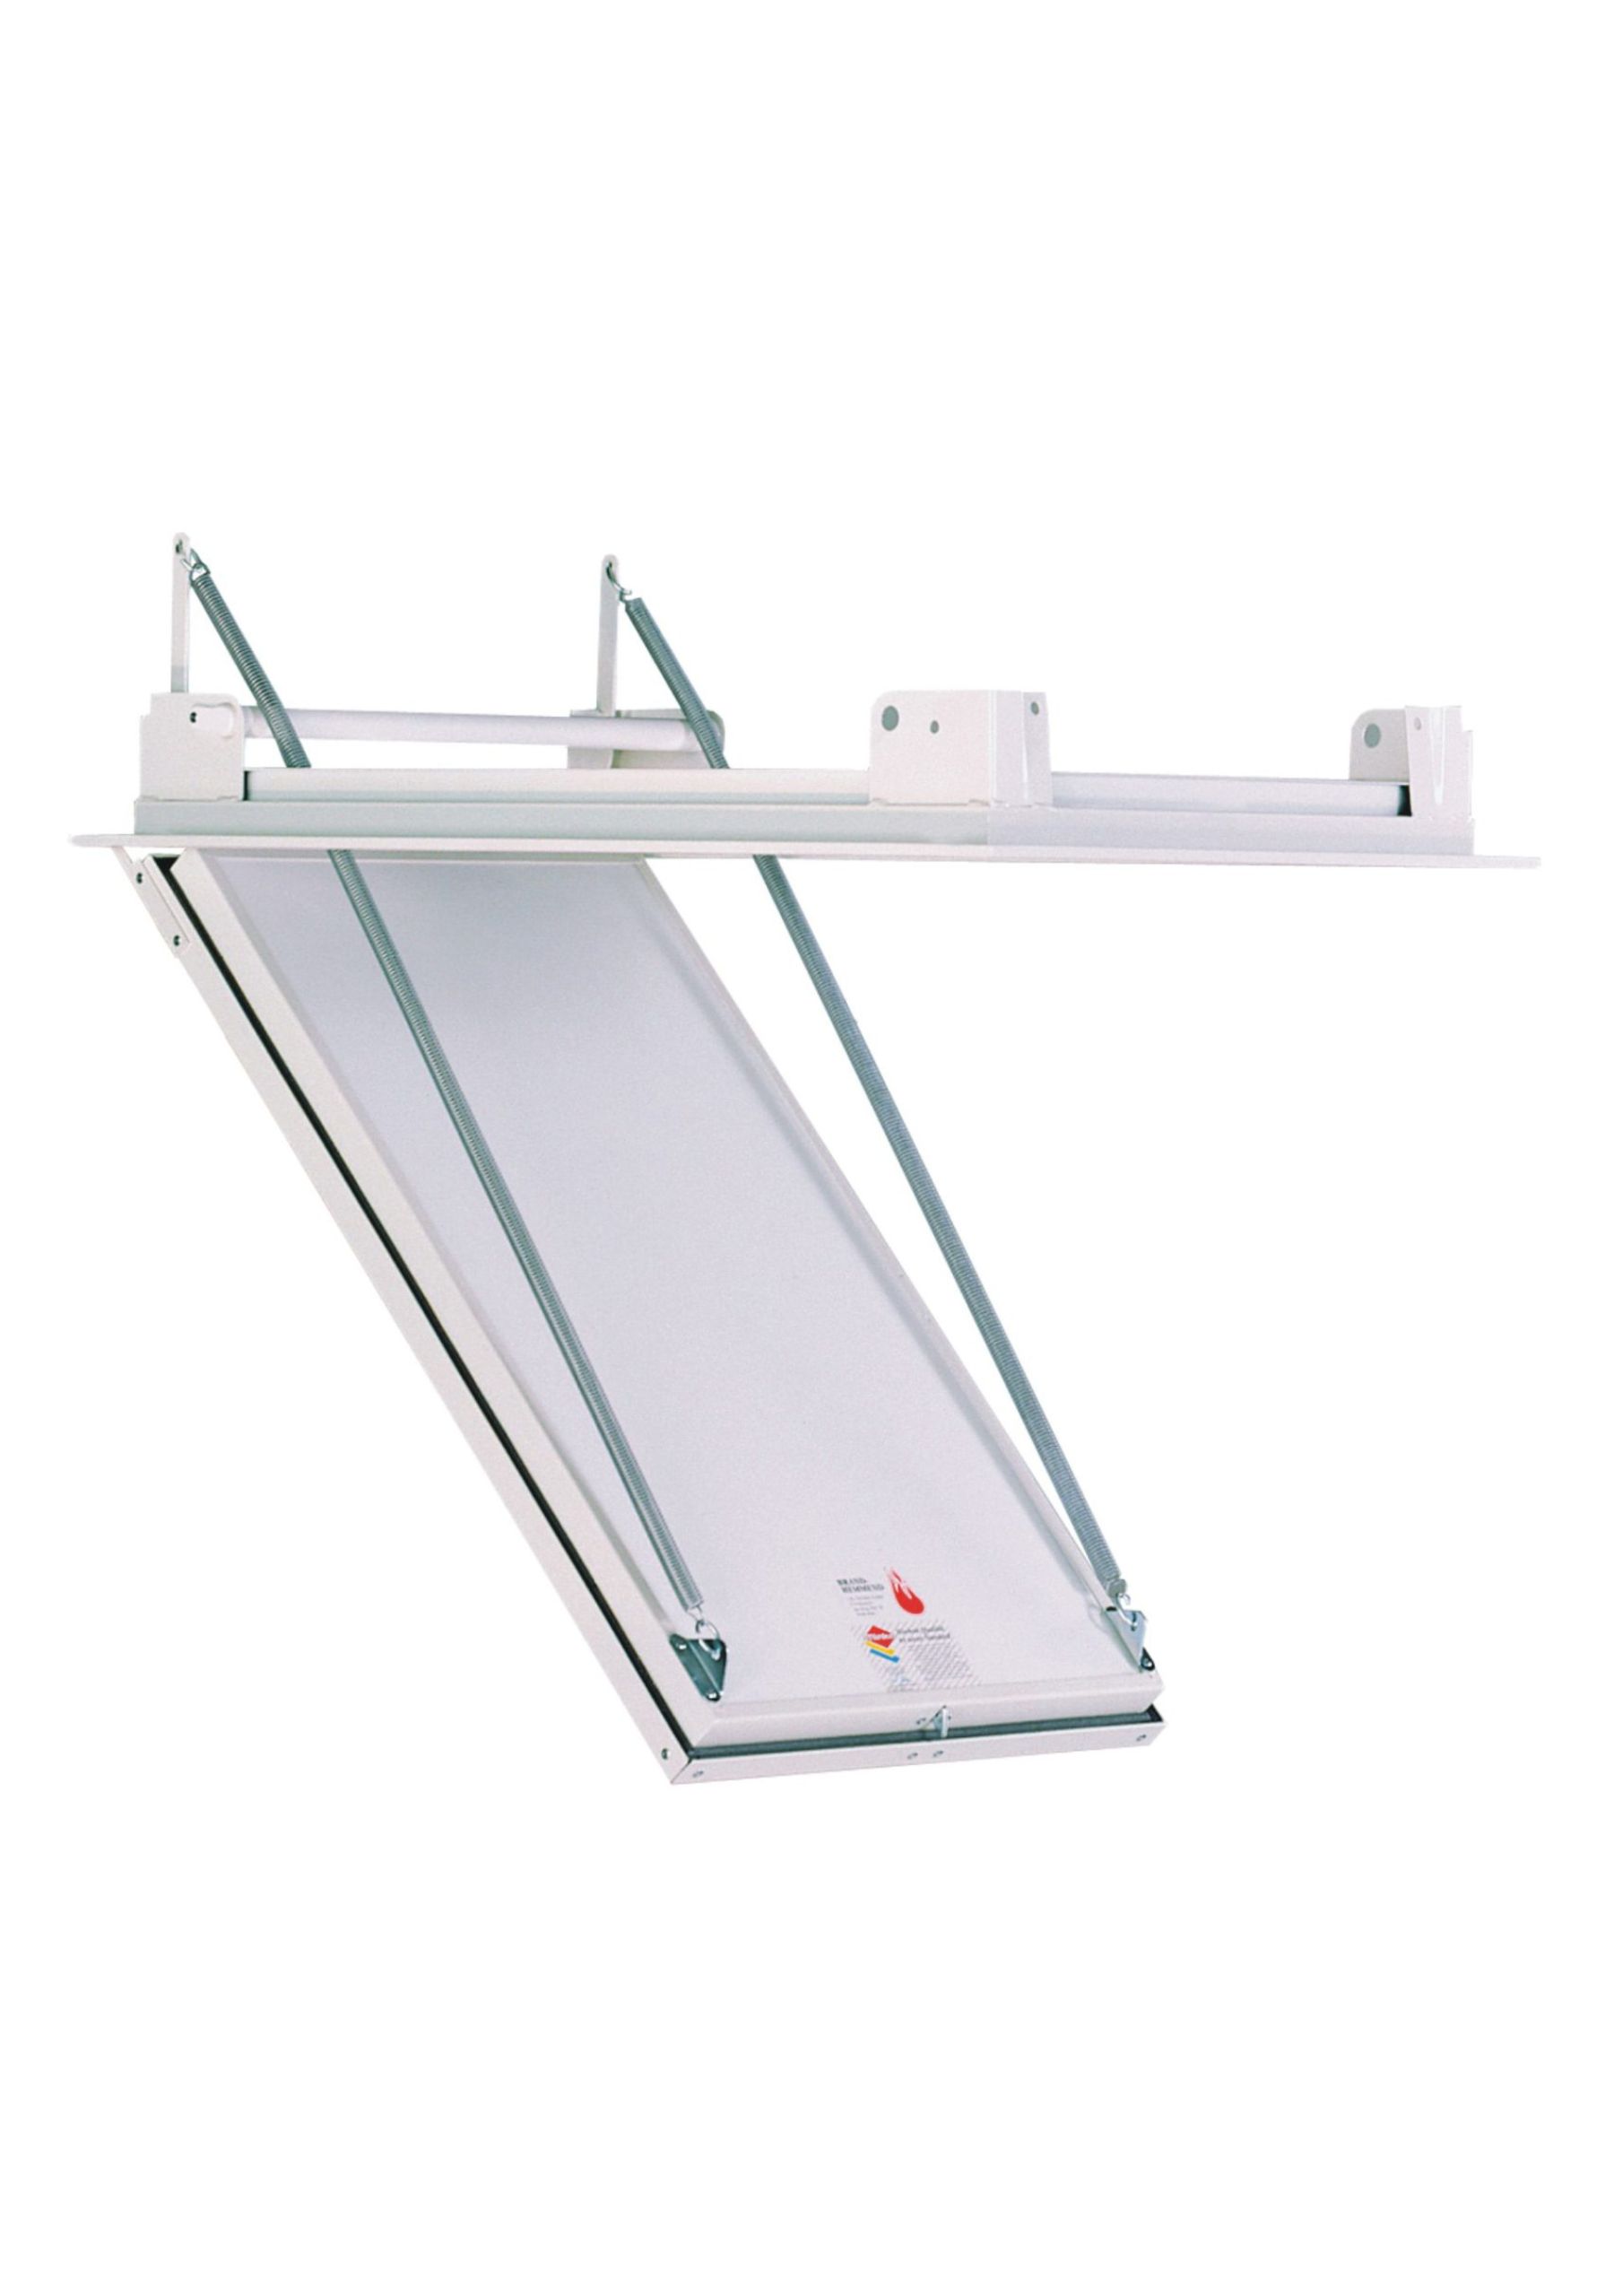 Hatch frame with cover ceiling mounting